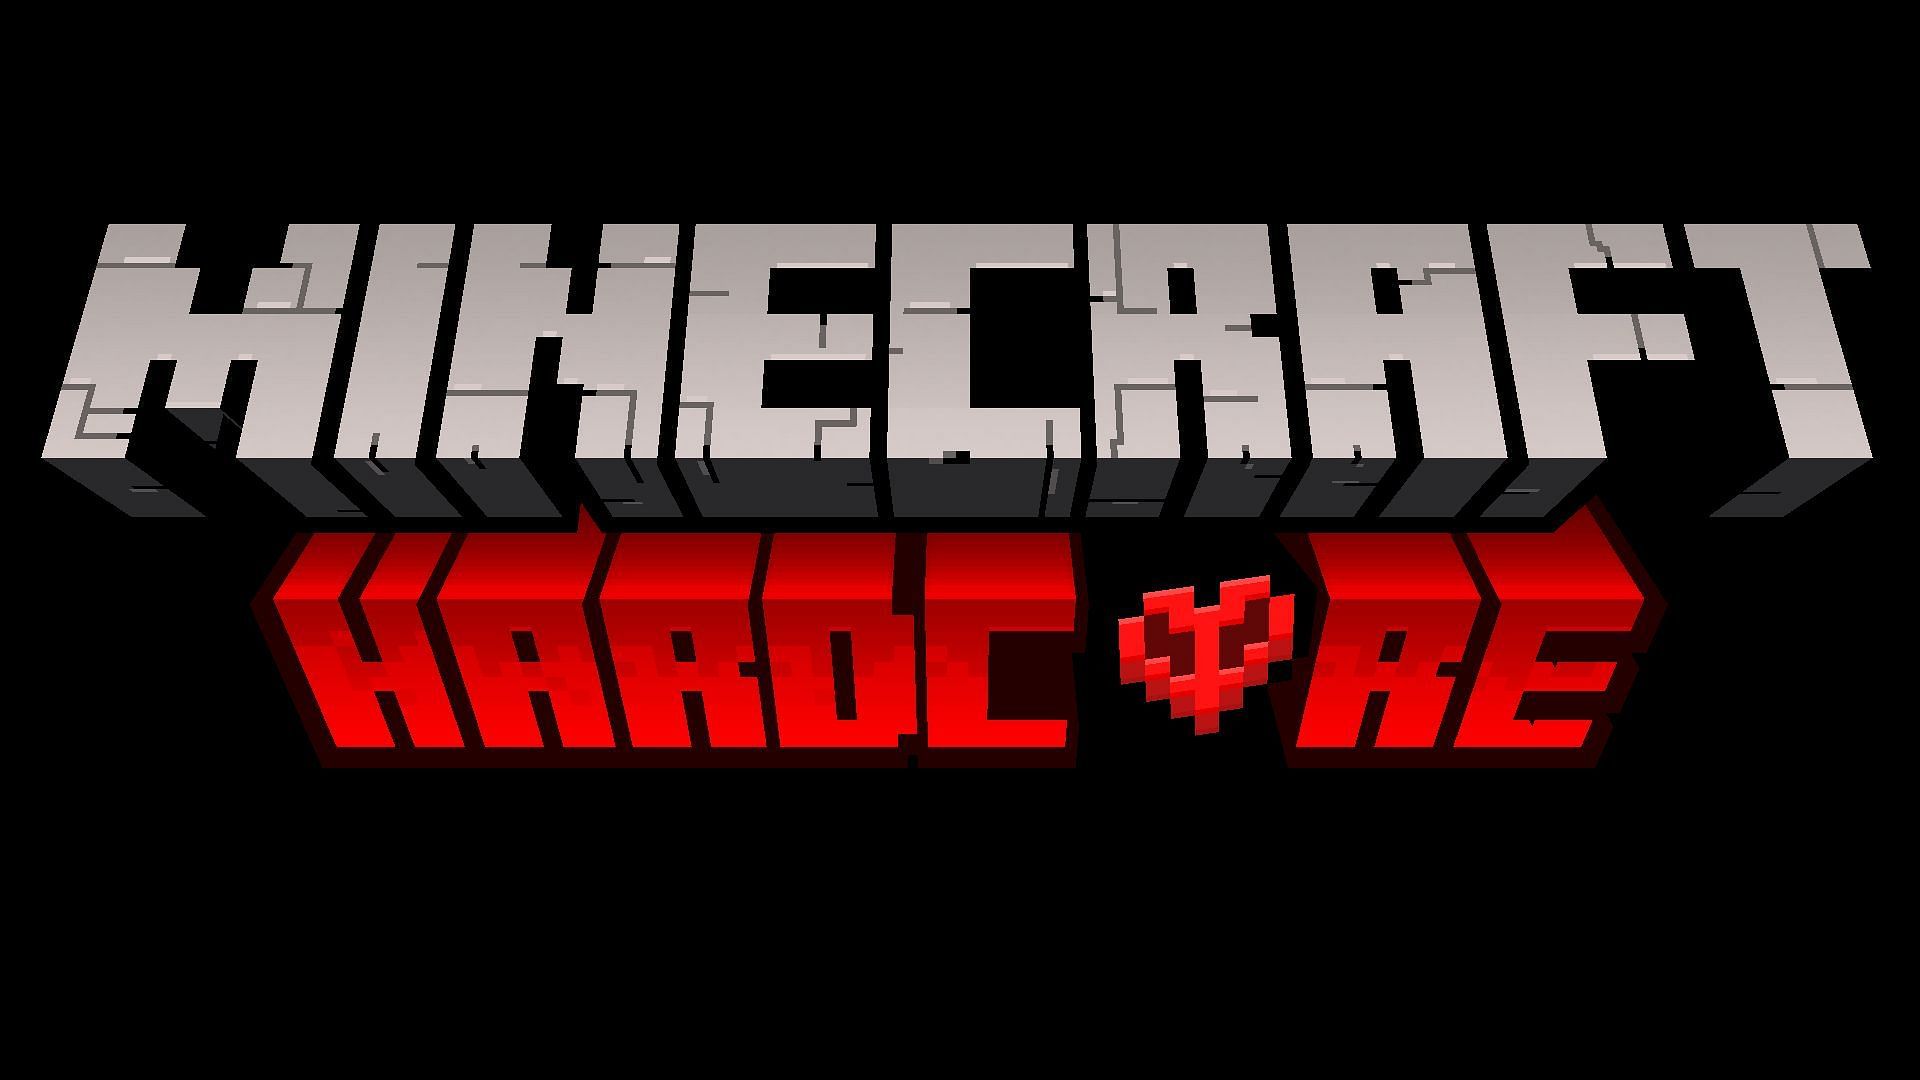 Hardcore Minecraft is one of the hardest modes the game has to offer (Image via Minecraft)